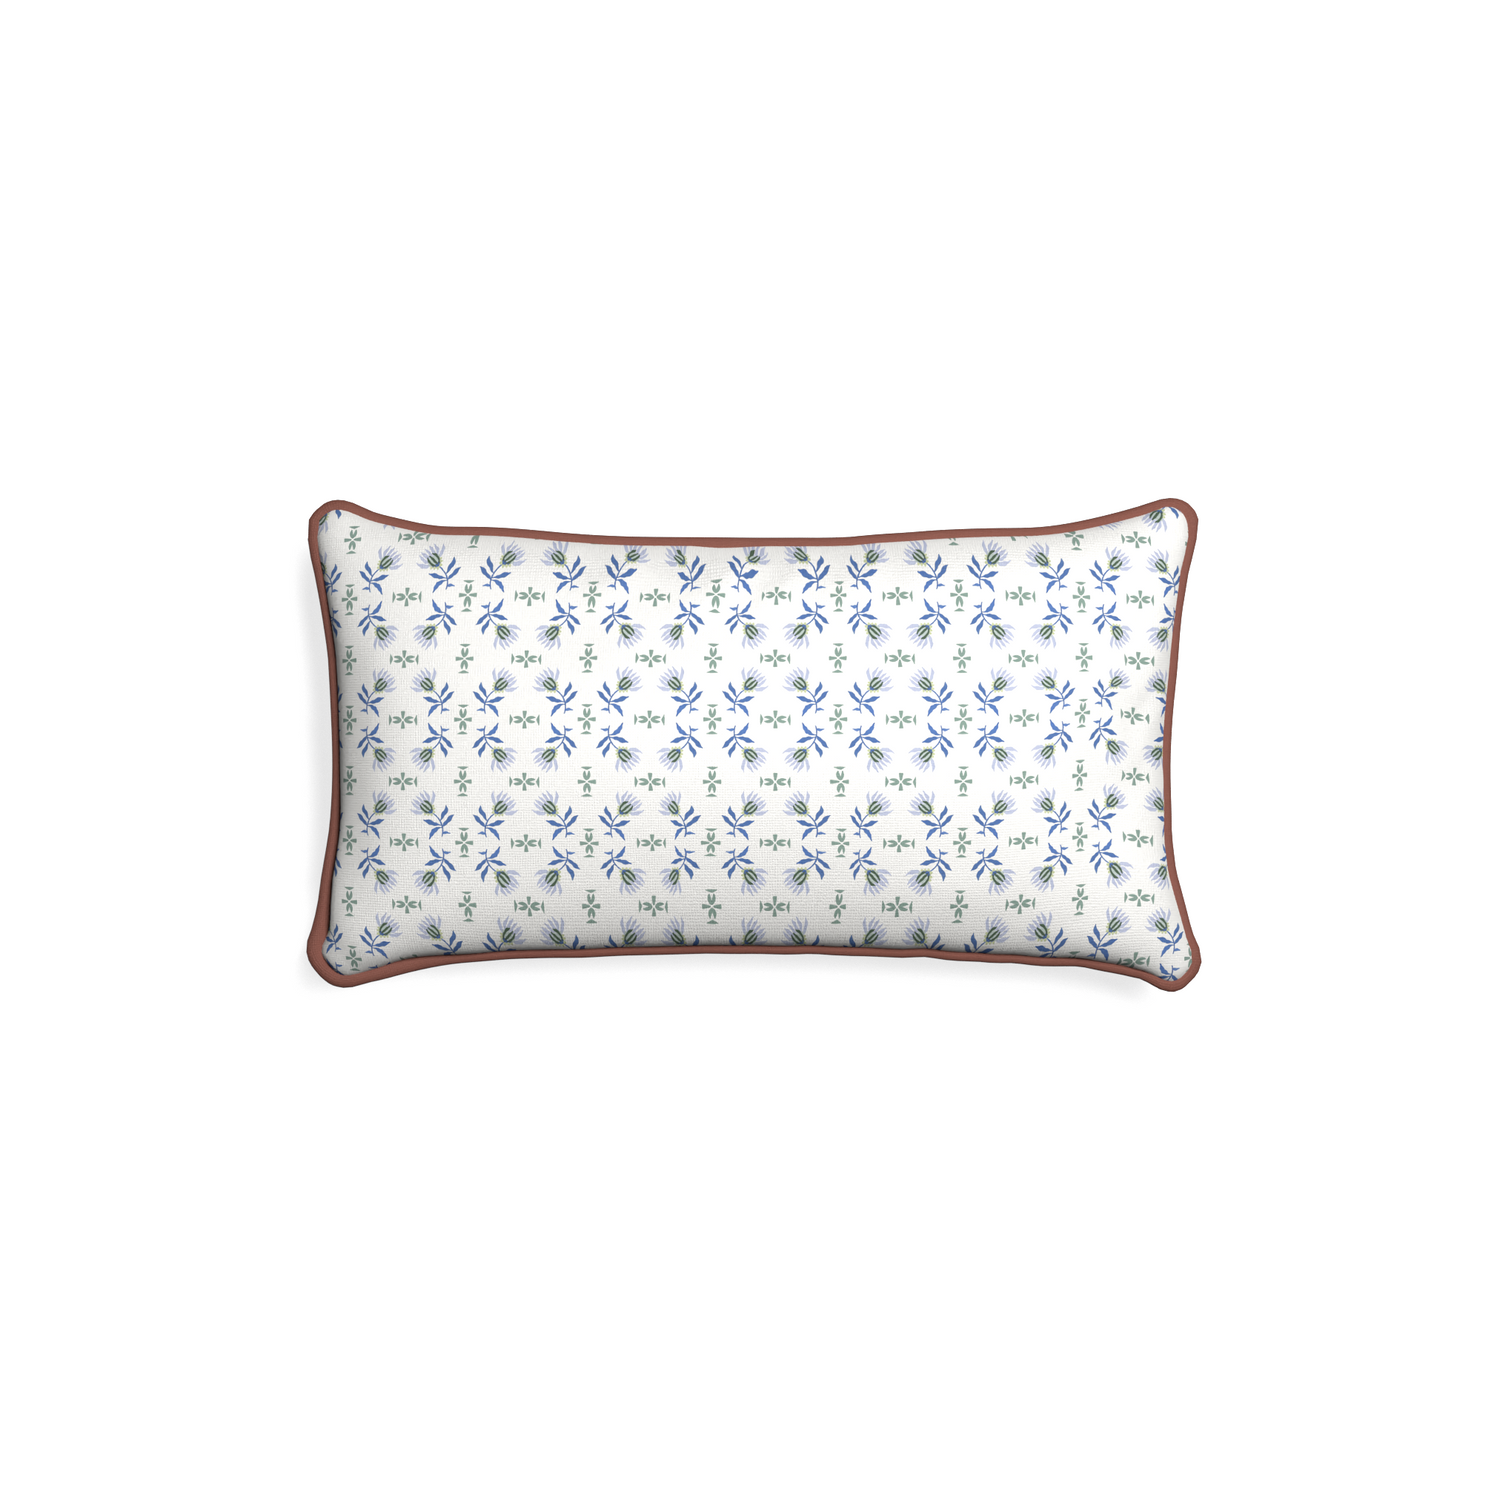 Petite-lumbar lee custom blue & green floralpillow with w piping on white background